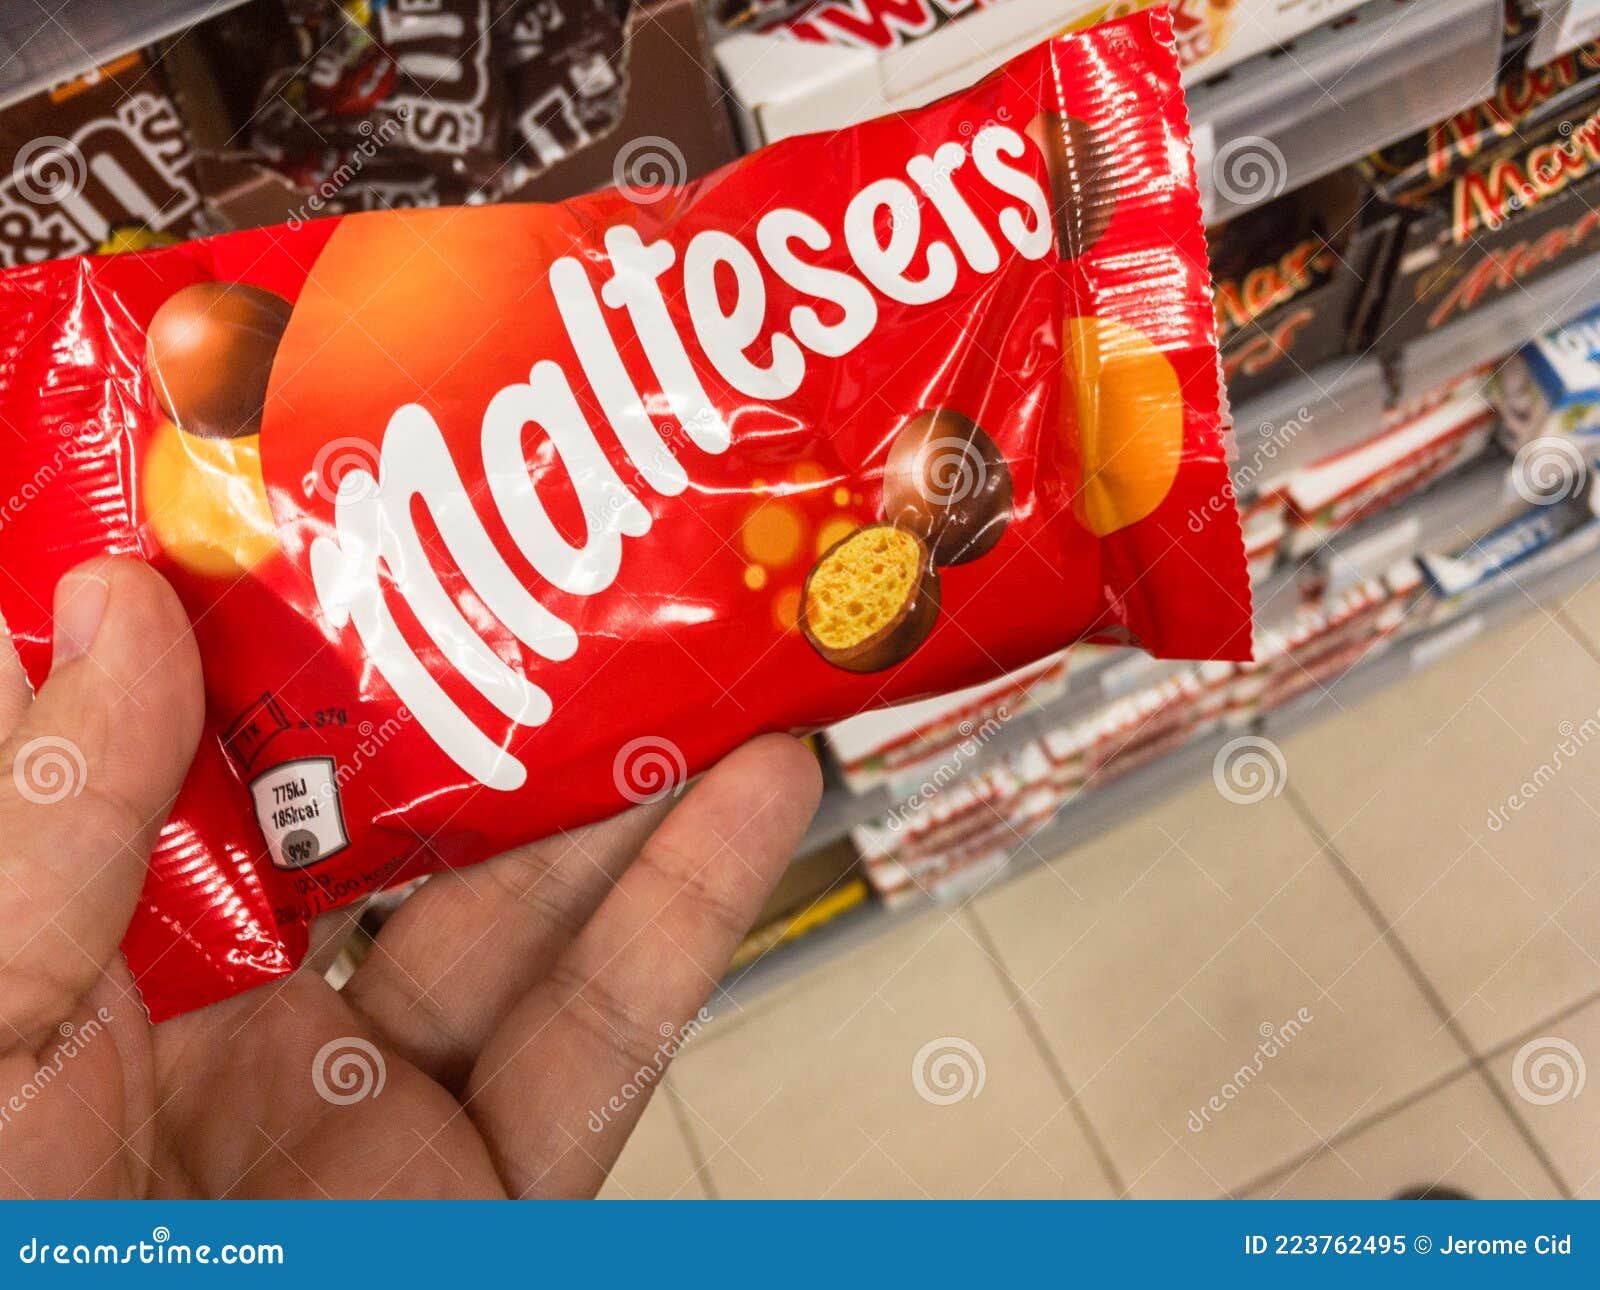 Open Bag Of Maltesers Chocolate Candy Stock Photo - Download Image